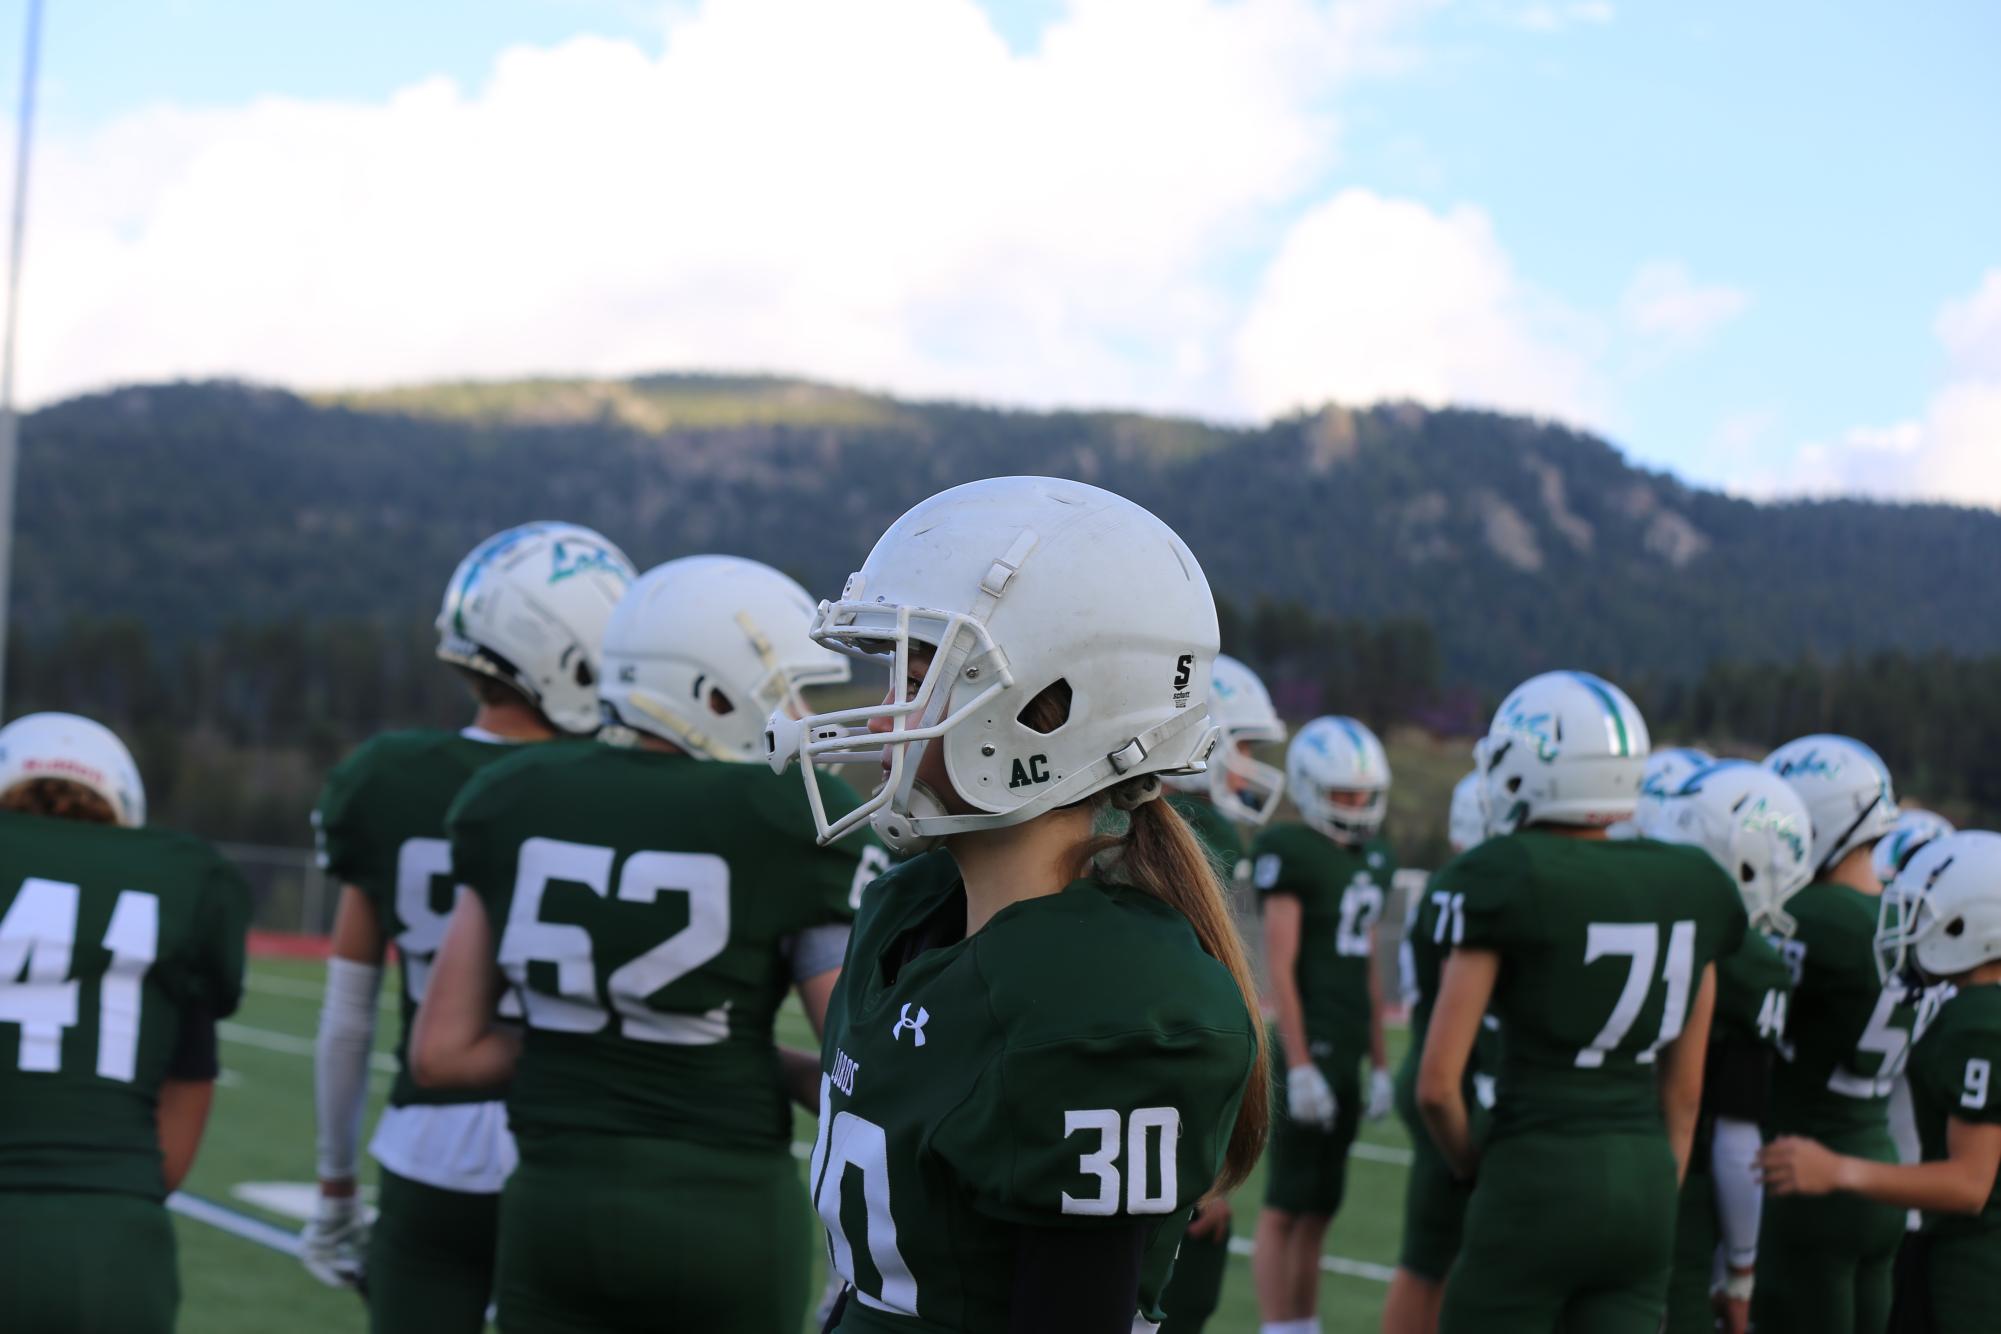 Freshman Abigail Leidel on the field during a Conifer home game. “There is no other feeling like being out on the field, there is such a rush of adrenaline and you can’t replicate it,” Leidel said.